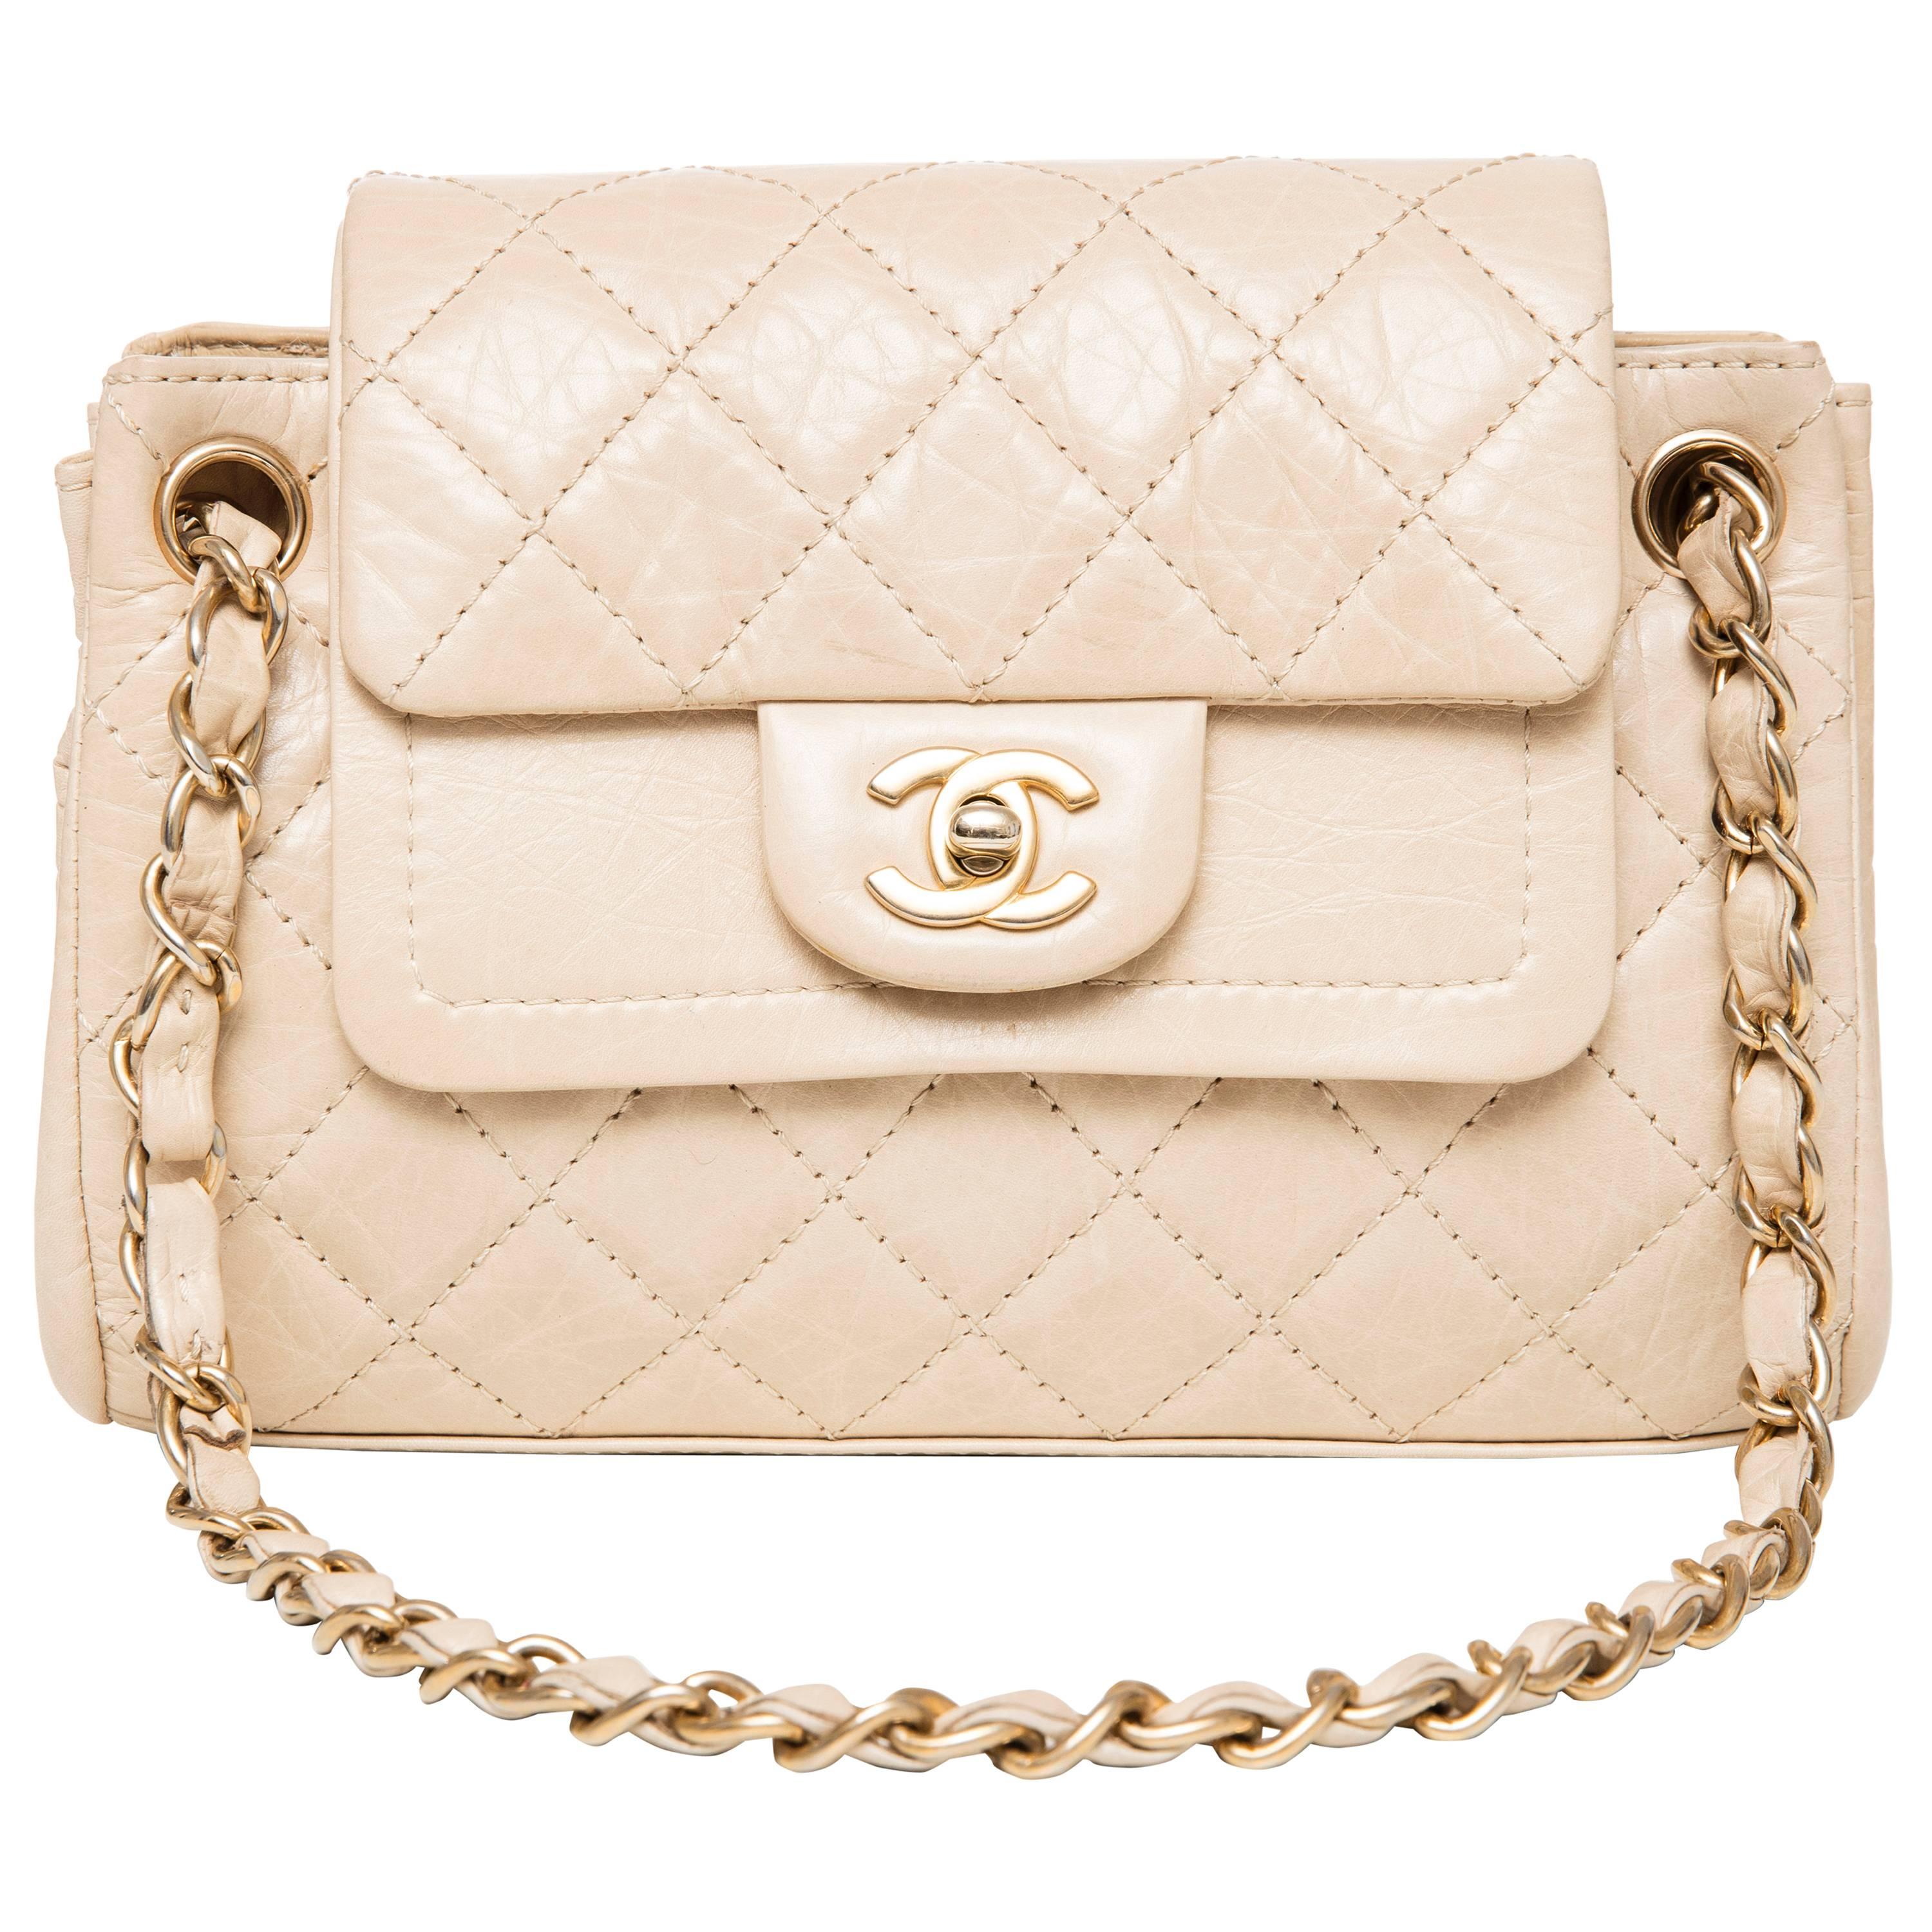 Chanel Beige Quilted Leather Sac Class Rabat Bag